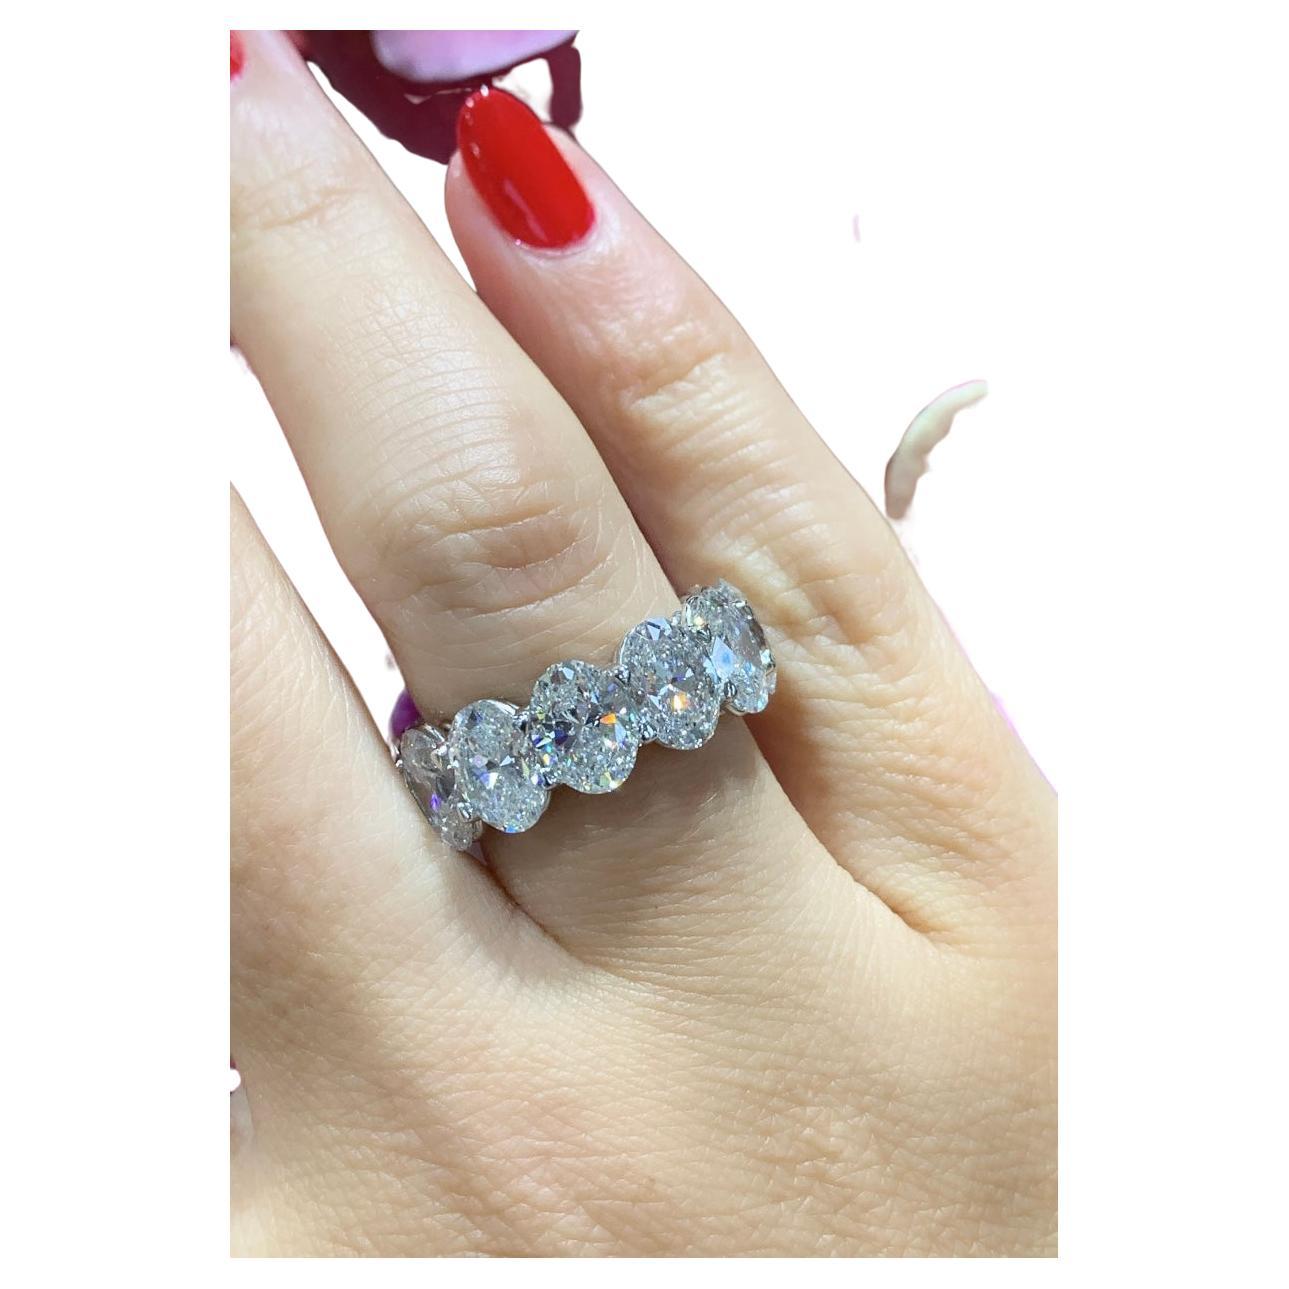 Oval cut diamond eternity band is absolutely amazingly crafted in luxurious Platinum and made with 12 oval cut diamonds of each GIA certified stone 12.10carats! True fit for a queen. Everyone will gasp with thrill when seeing it on her hand.
Metal: